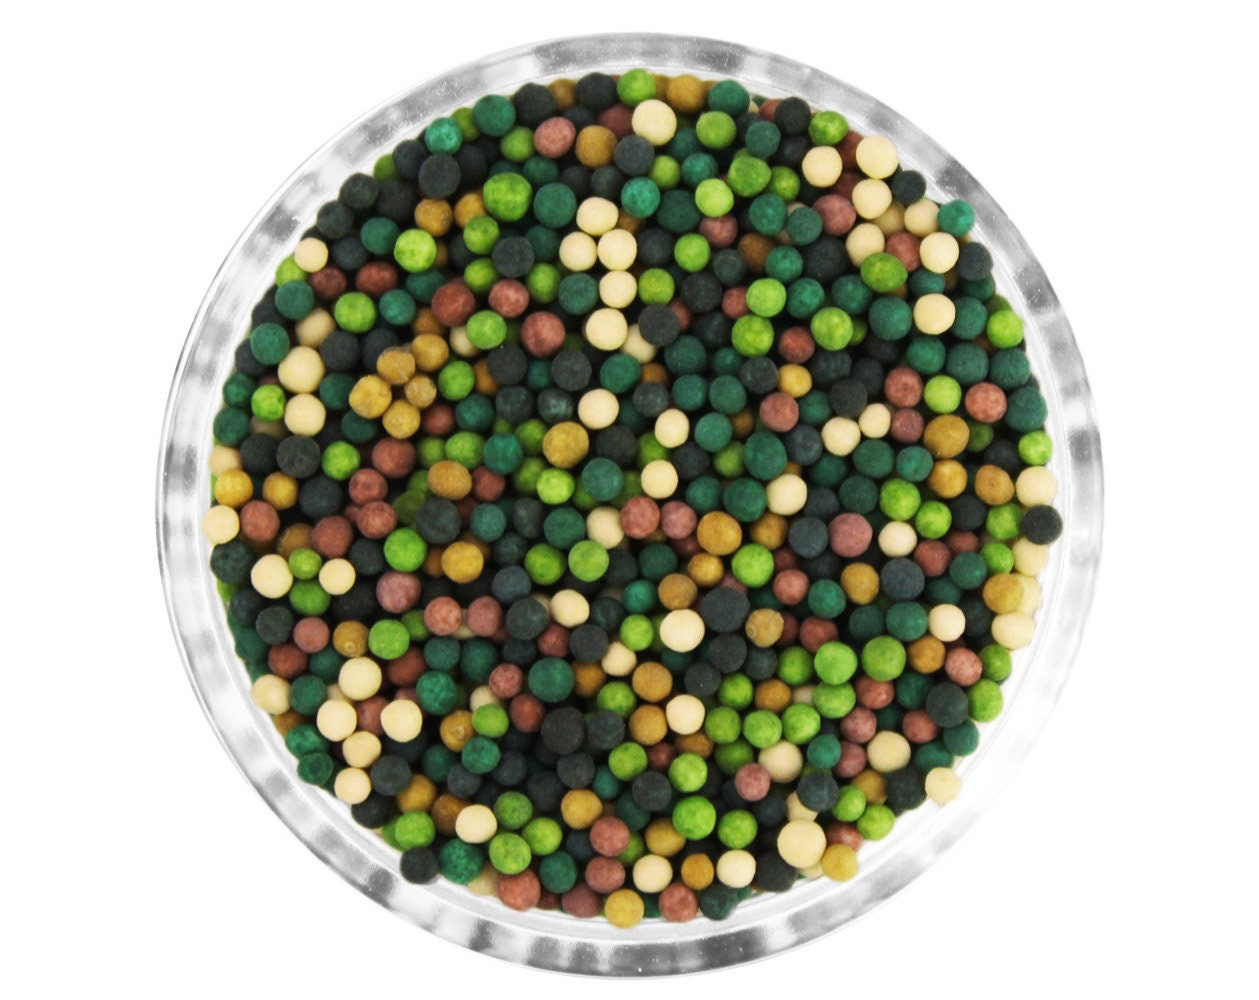 Camo Non-Pareils Blend - Our Camo Blend Is A Mix Of Classic Non-Pareils in Black, Forest Green, Olive Brown, Golden & Sand